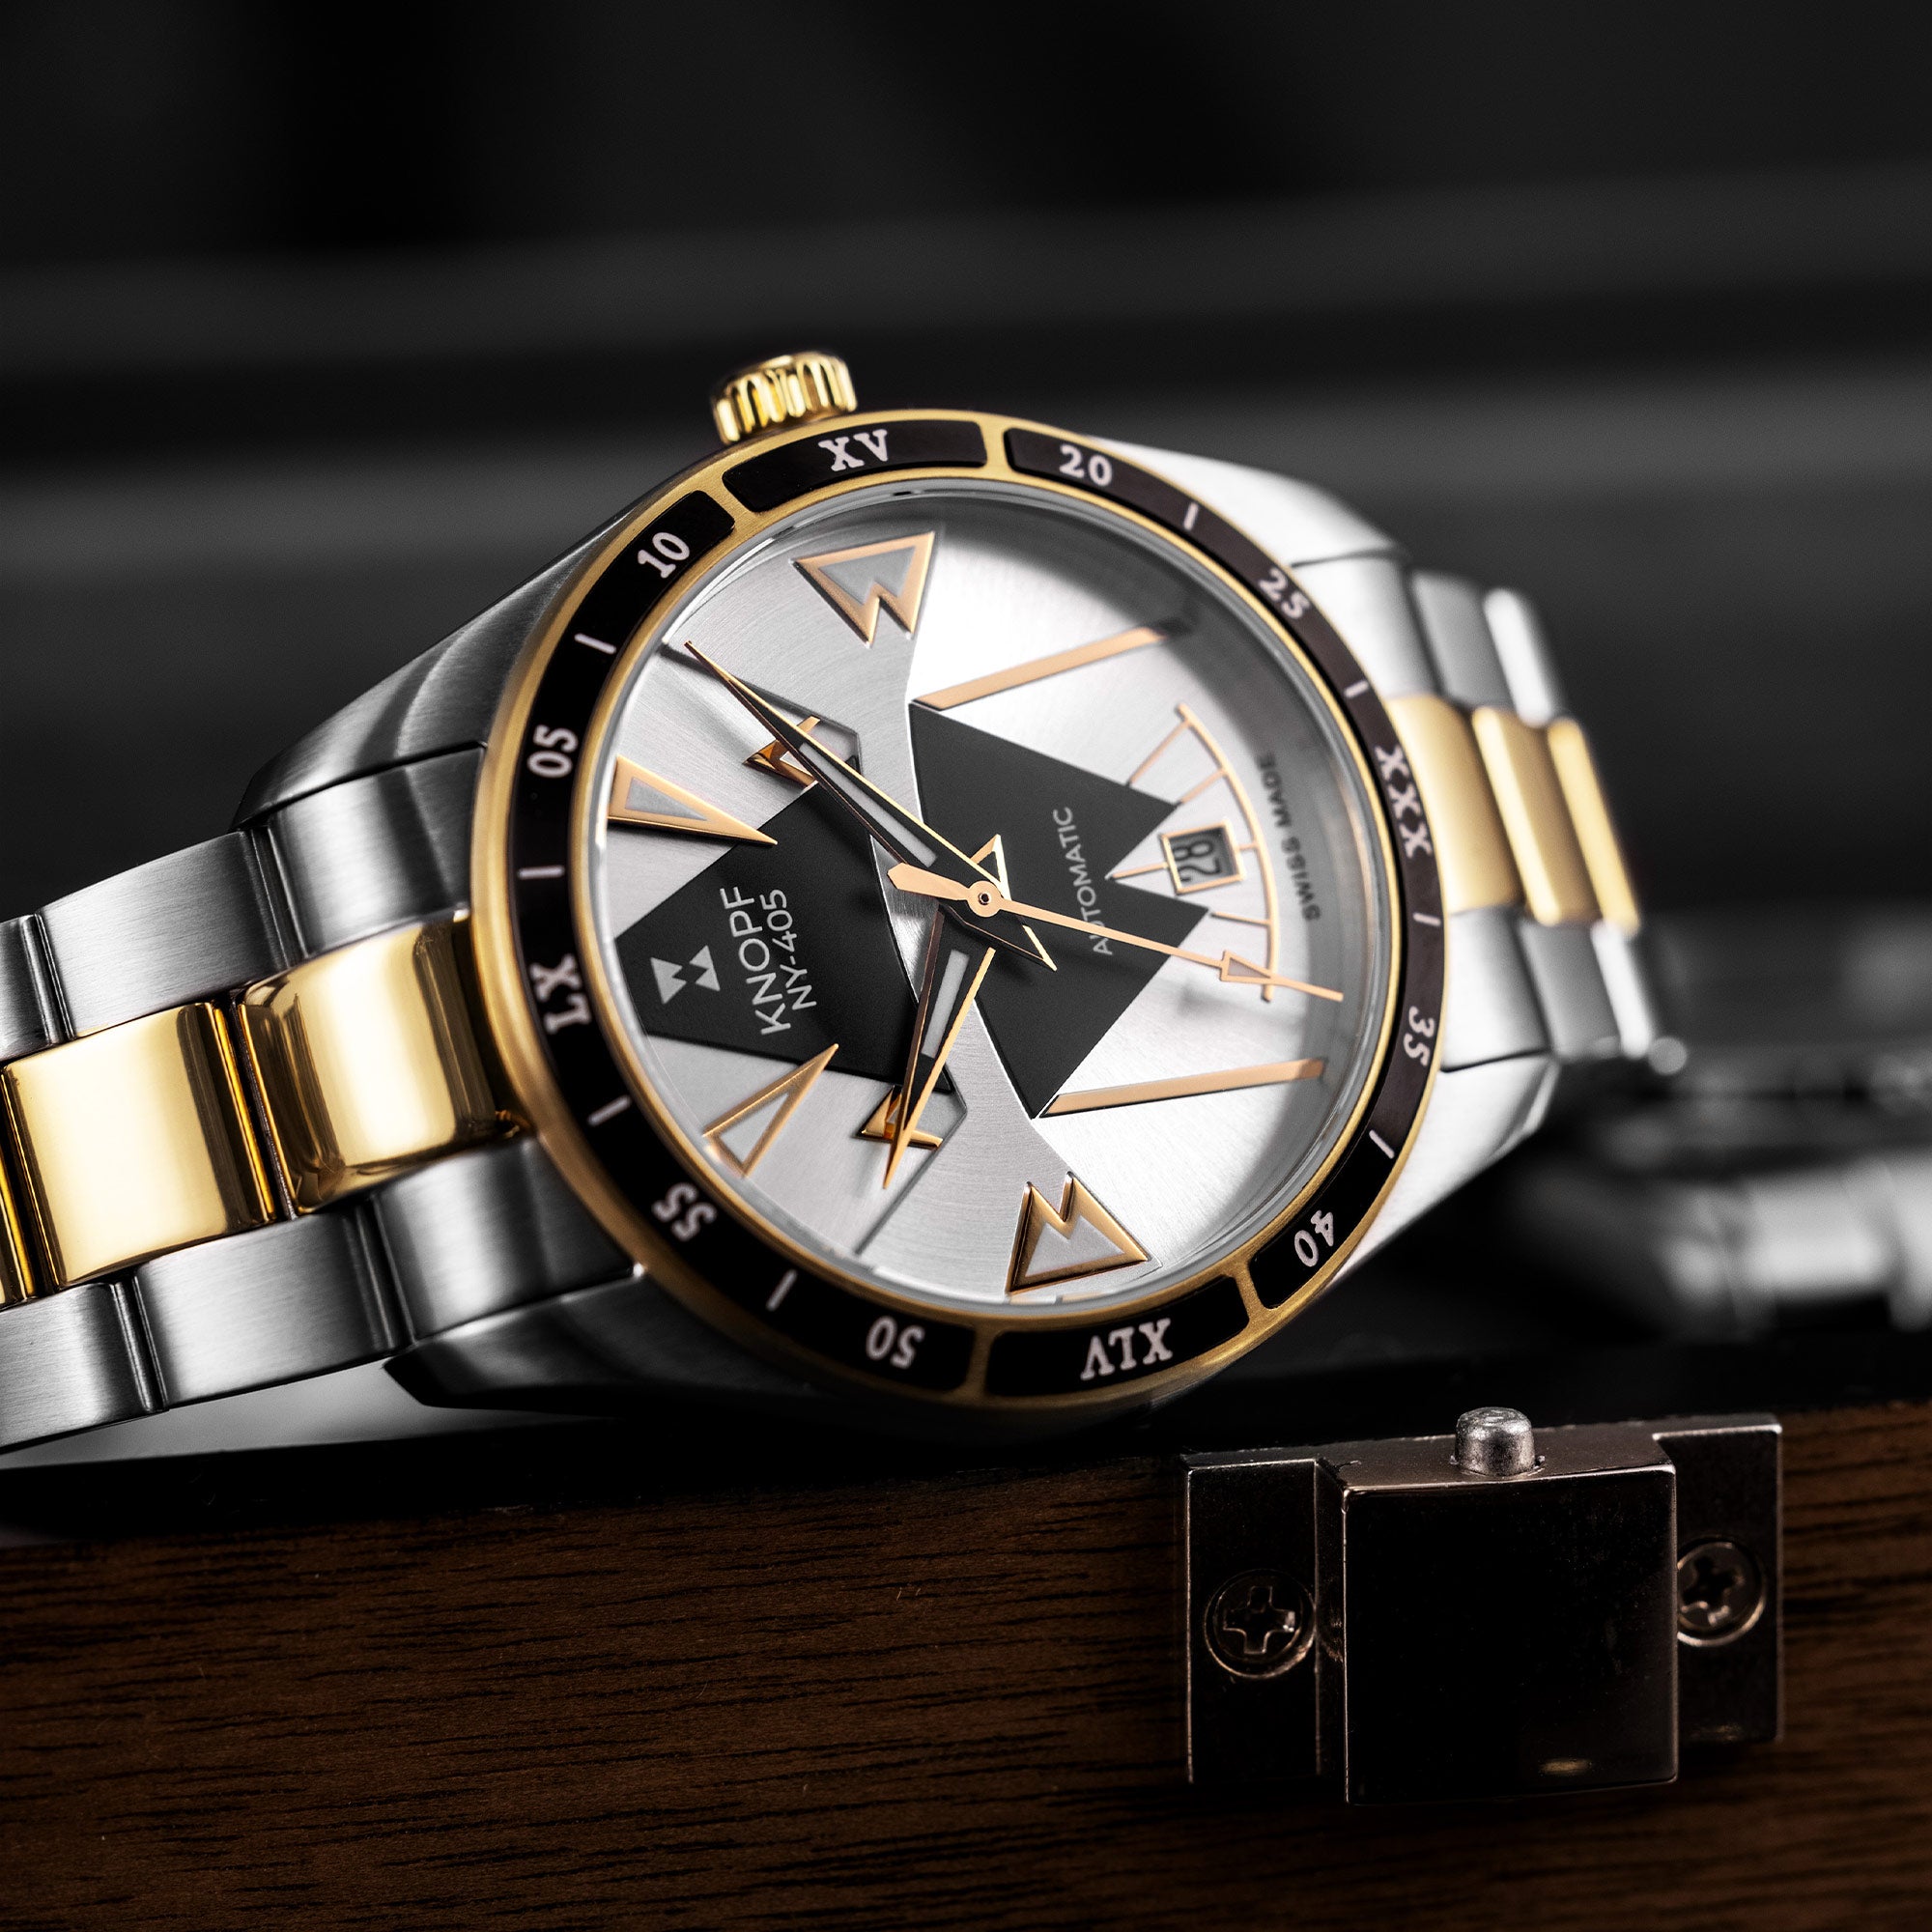 Enjoy with modern and world-class watches